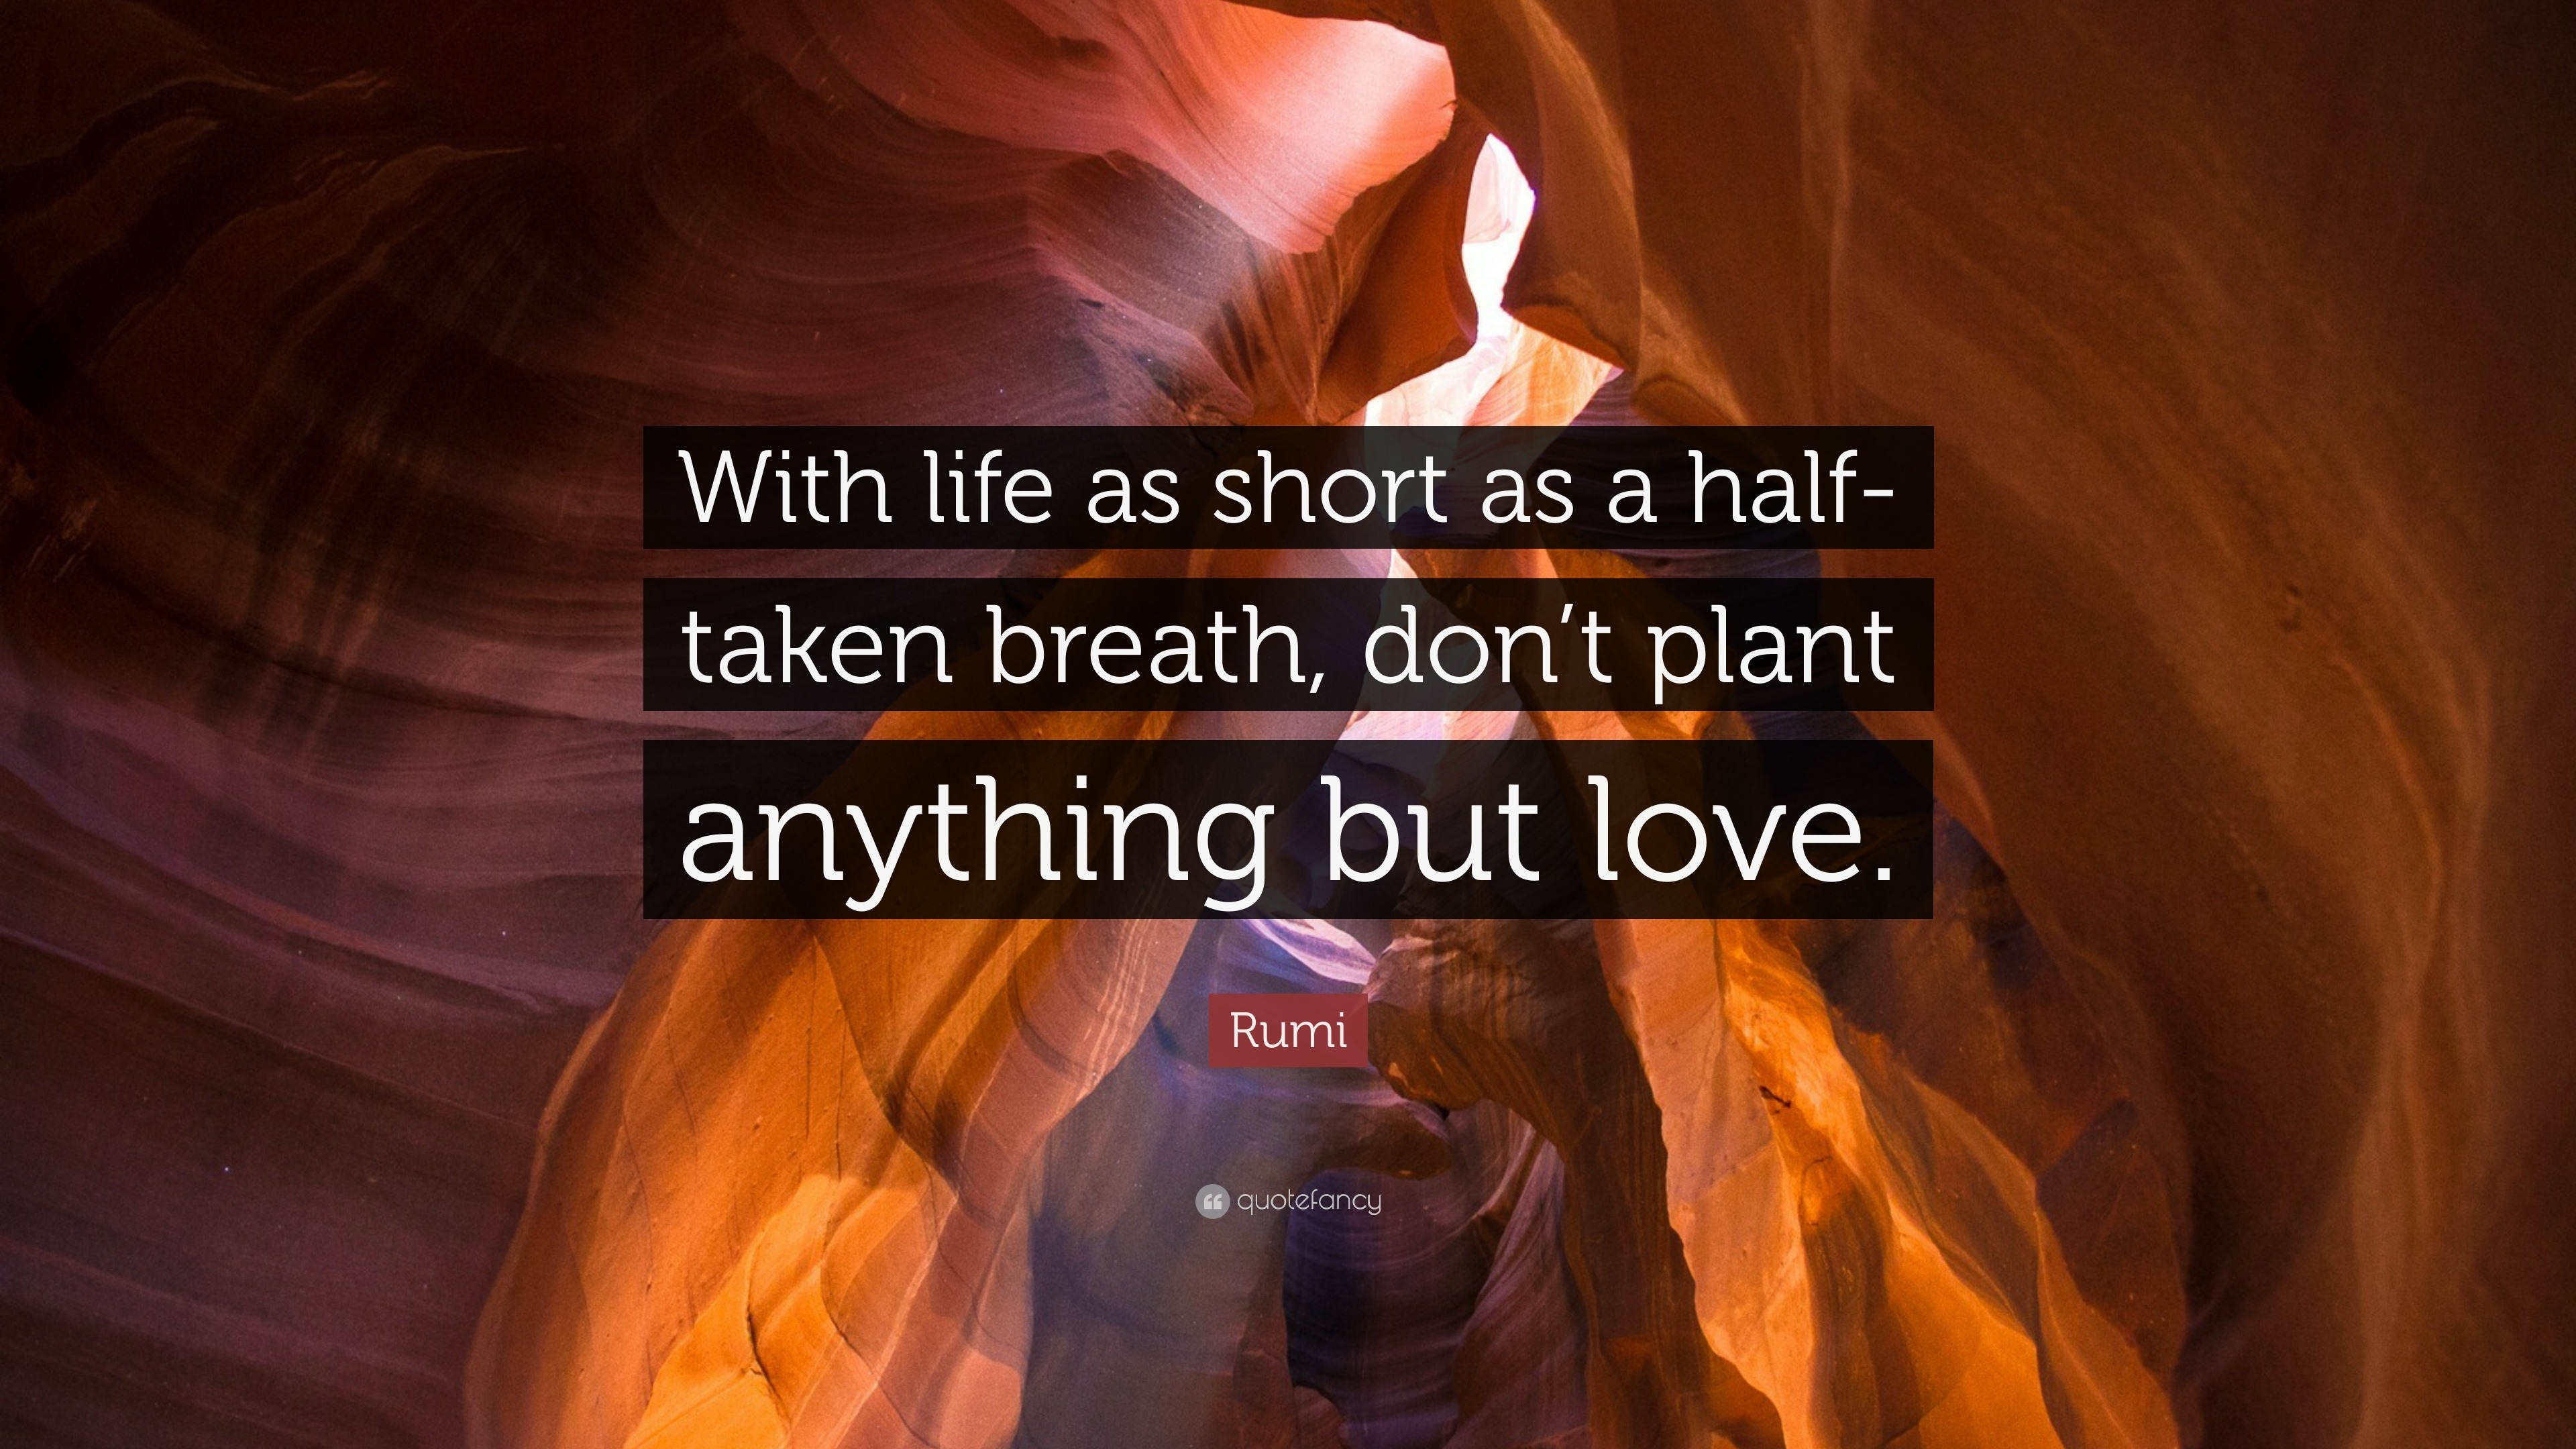 Rumi Quote “With life as short as a half taken breath don